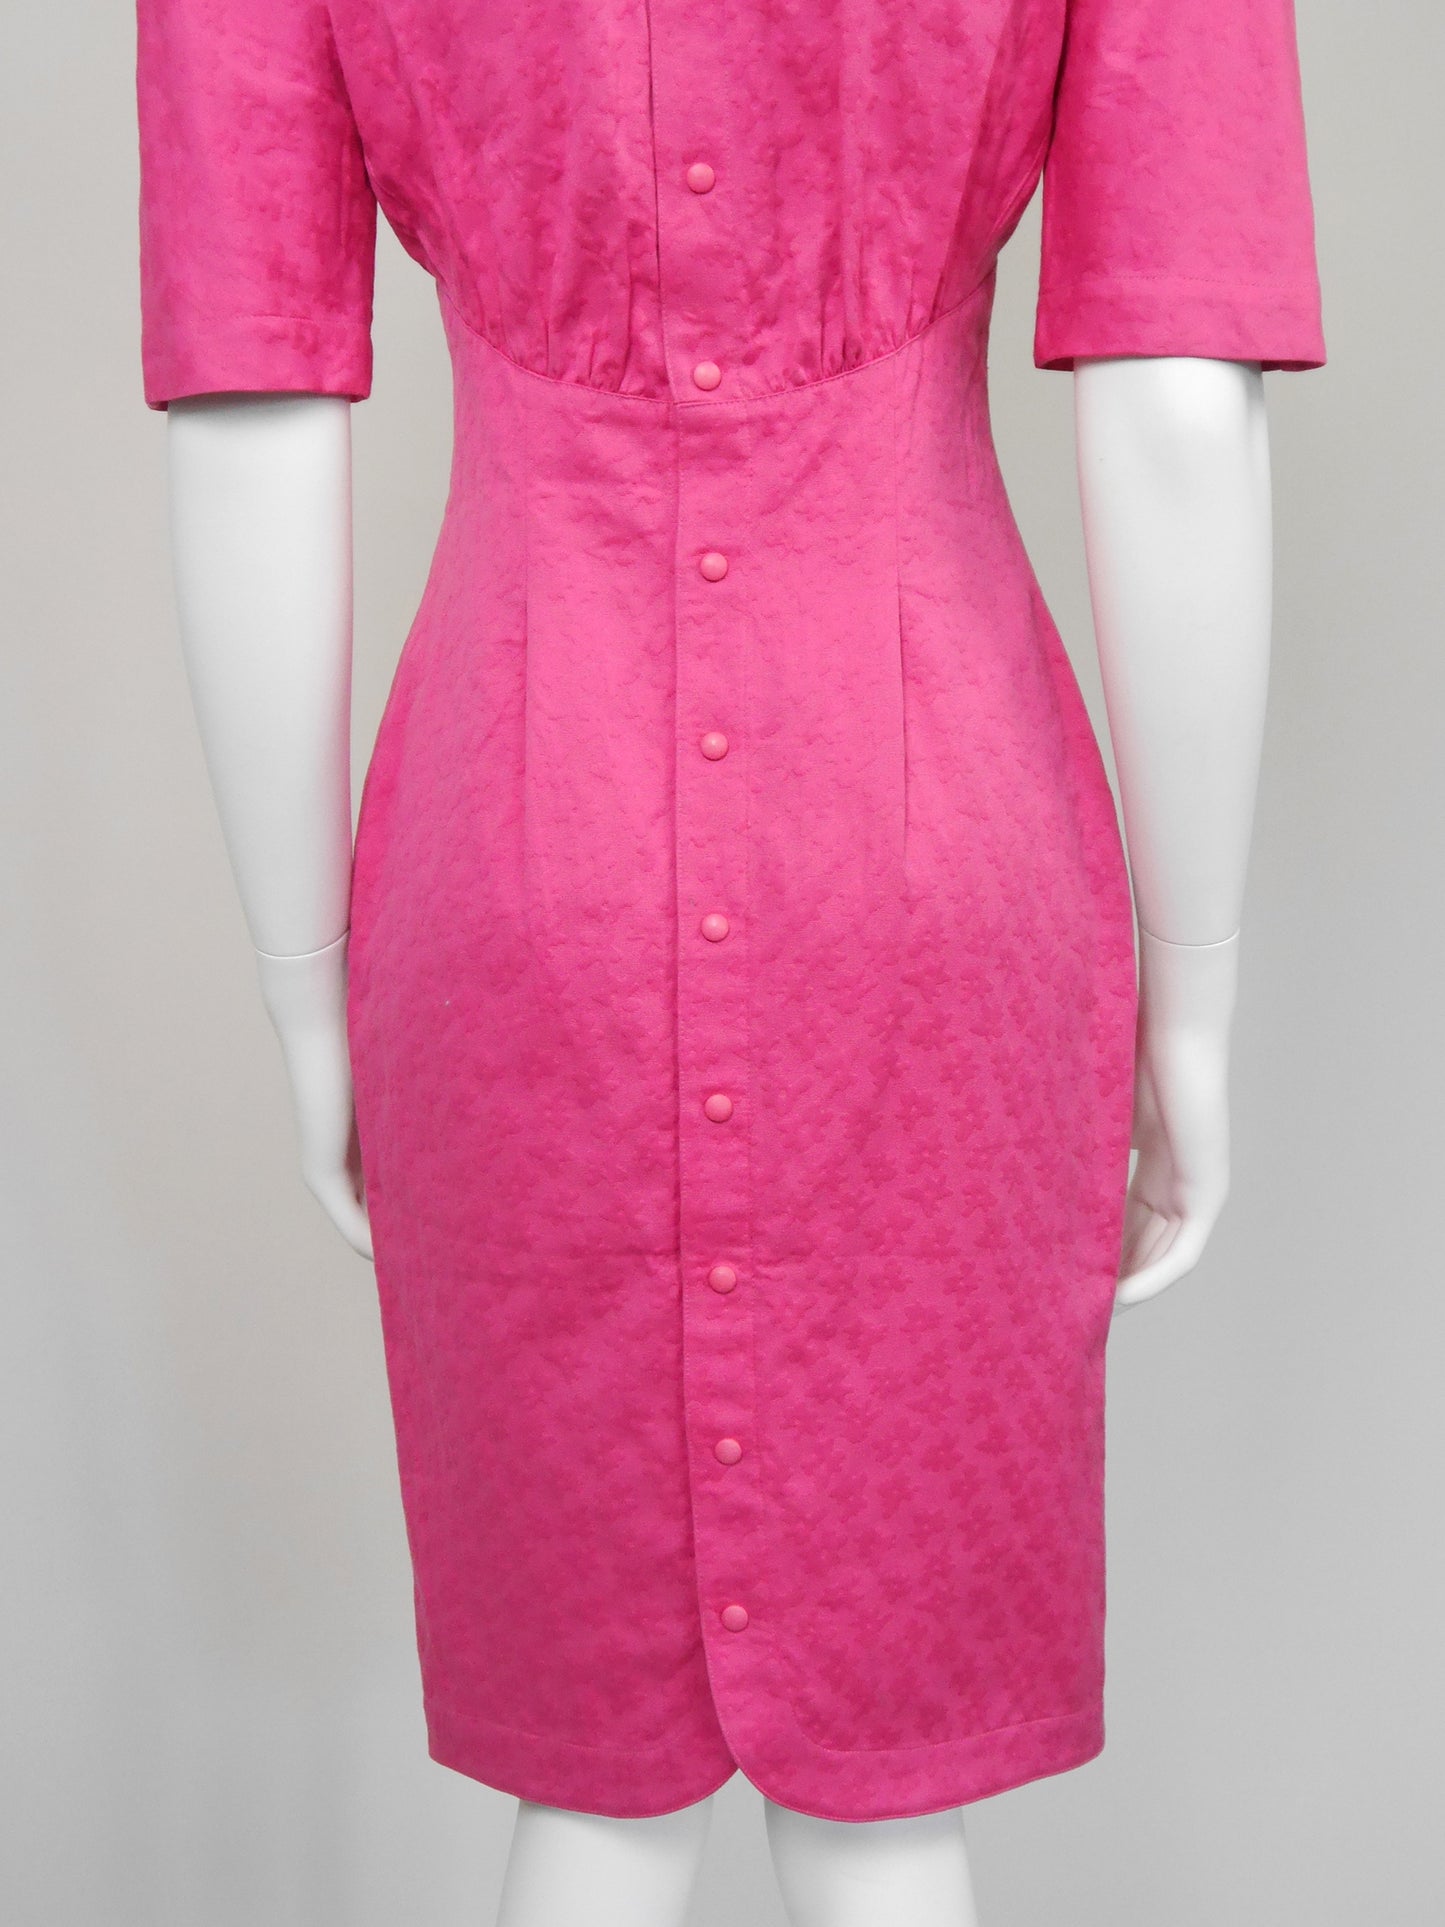 THIERRY MUGLER 1980s 1990s Vintage Pink Cotton Day Dress Size XS